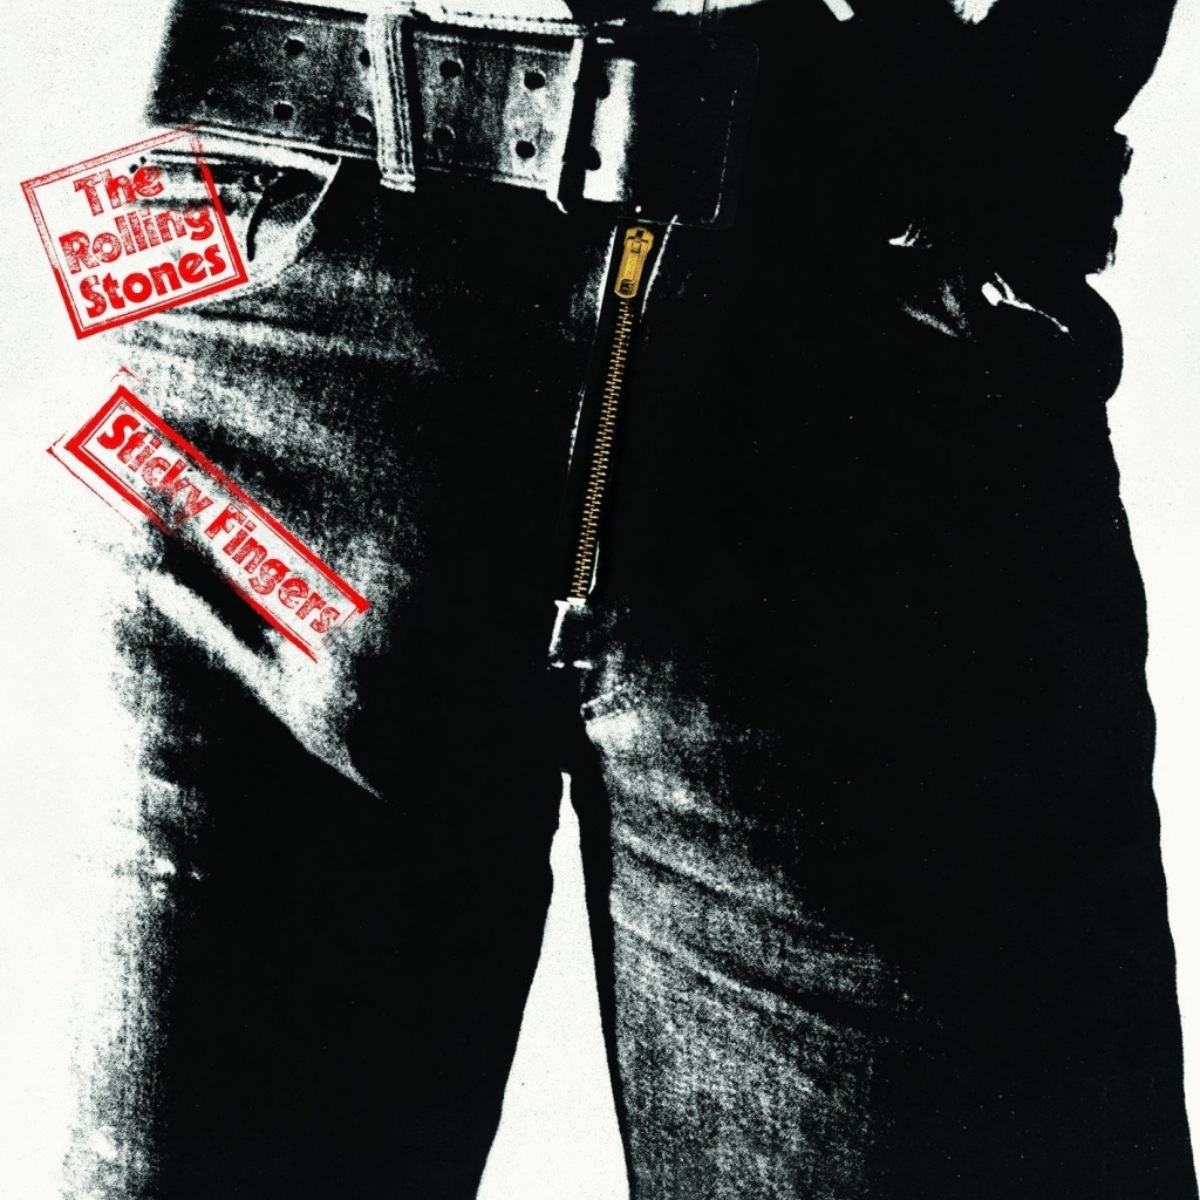 Rolling Stones' Sticky Fingers album cover